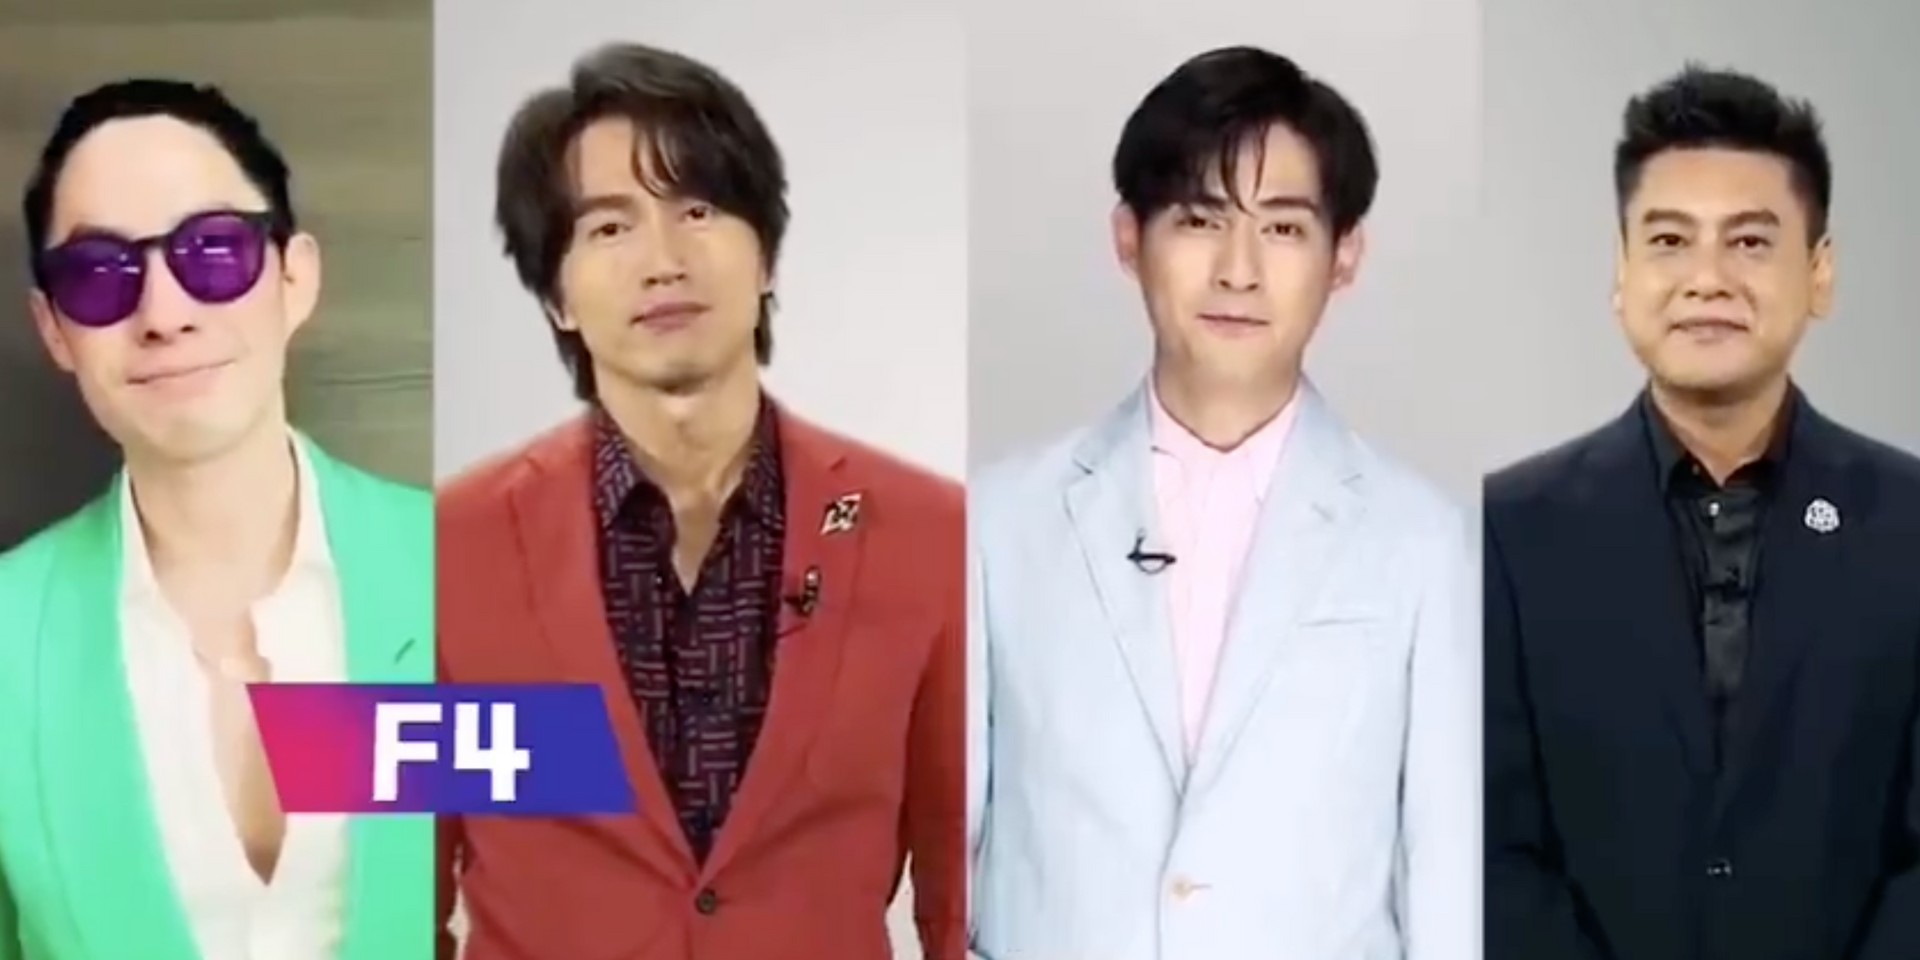 Taiwanese boyband F4 are back for a reunion show